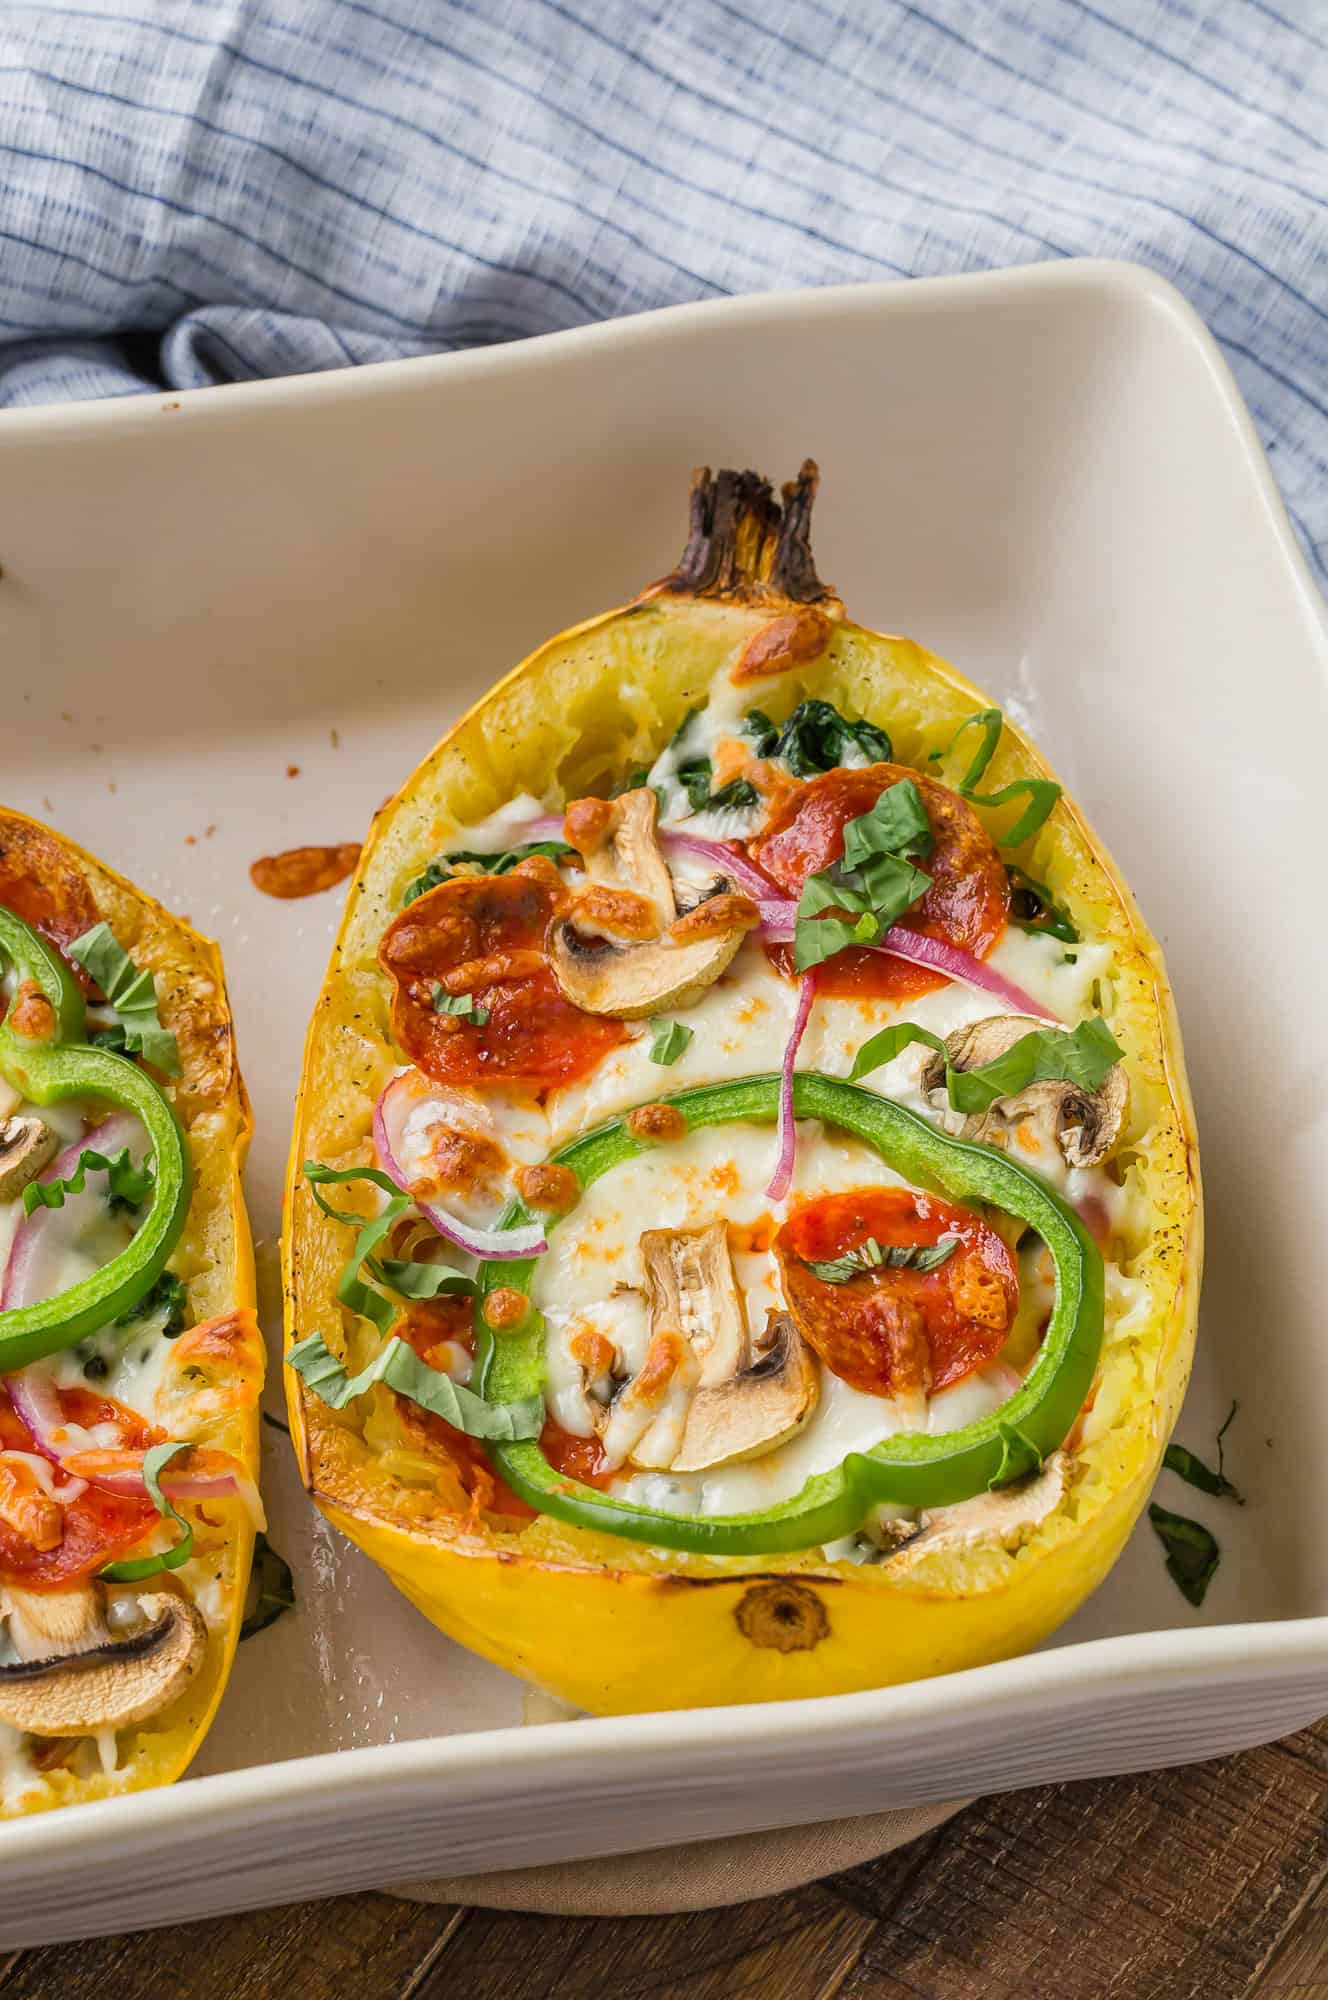 Squash filled with pizza toppings.